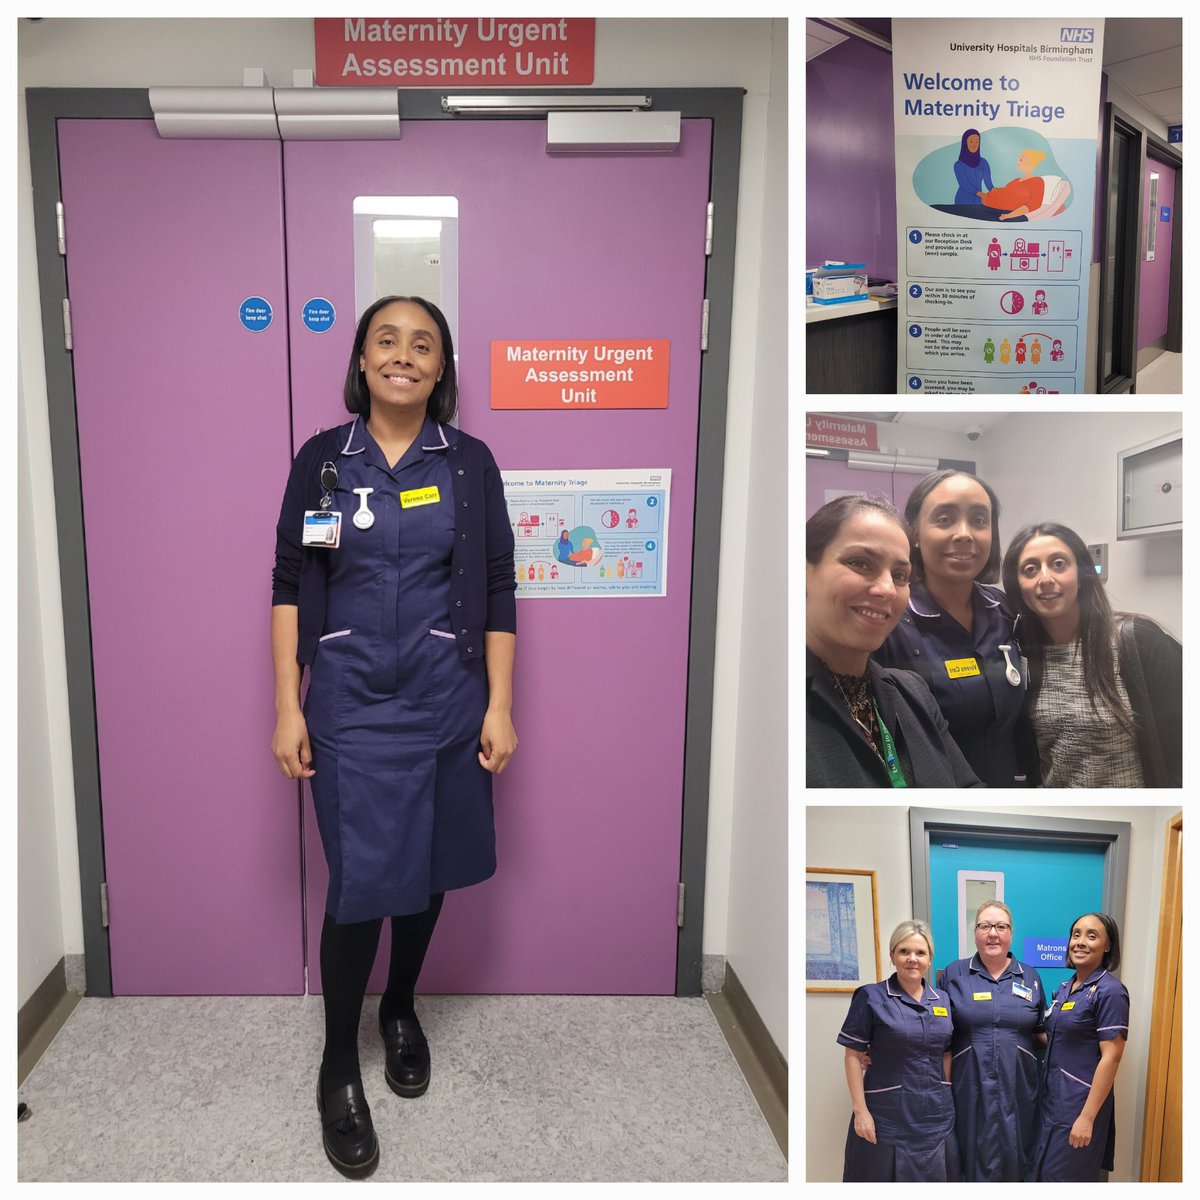 Thank you to @uhbtrust matrons: Verena Carr @Vcee3112 @ClareBeesley2 & Louise Thompson for recently showing members of the Strategic Projects Team around the Maternity Urgent Assessment Unit at Heartlands Hospital. Thank you also for your leadership & all you do.